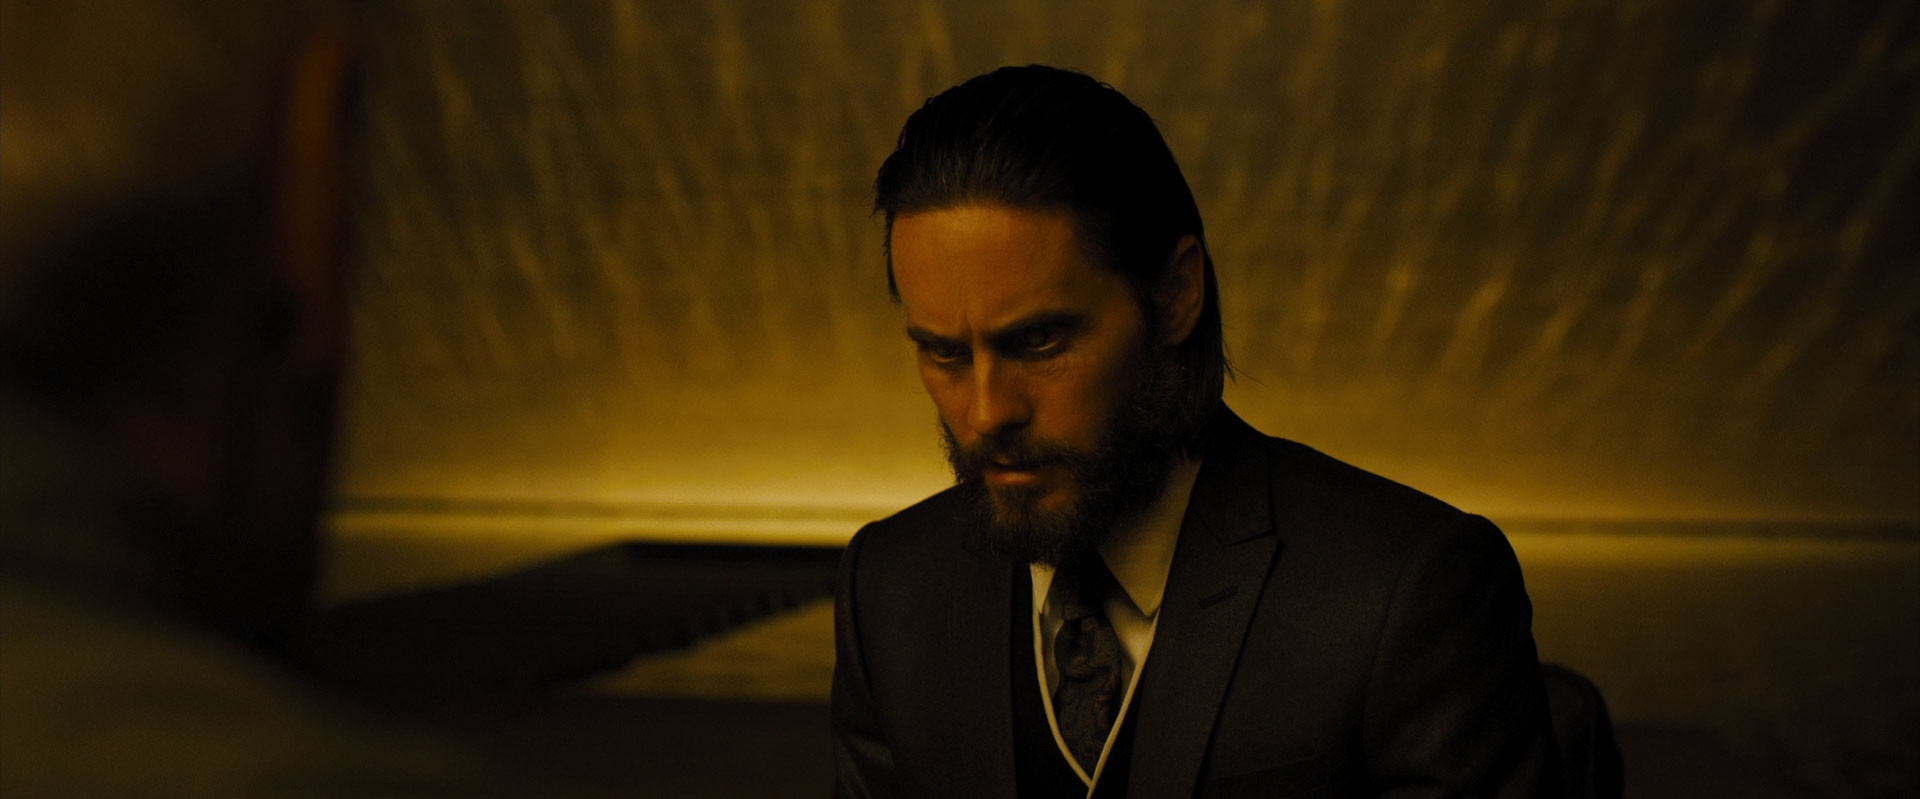 Jared Leto As Niander Wallace Blade Runner 2049 Wallpapers